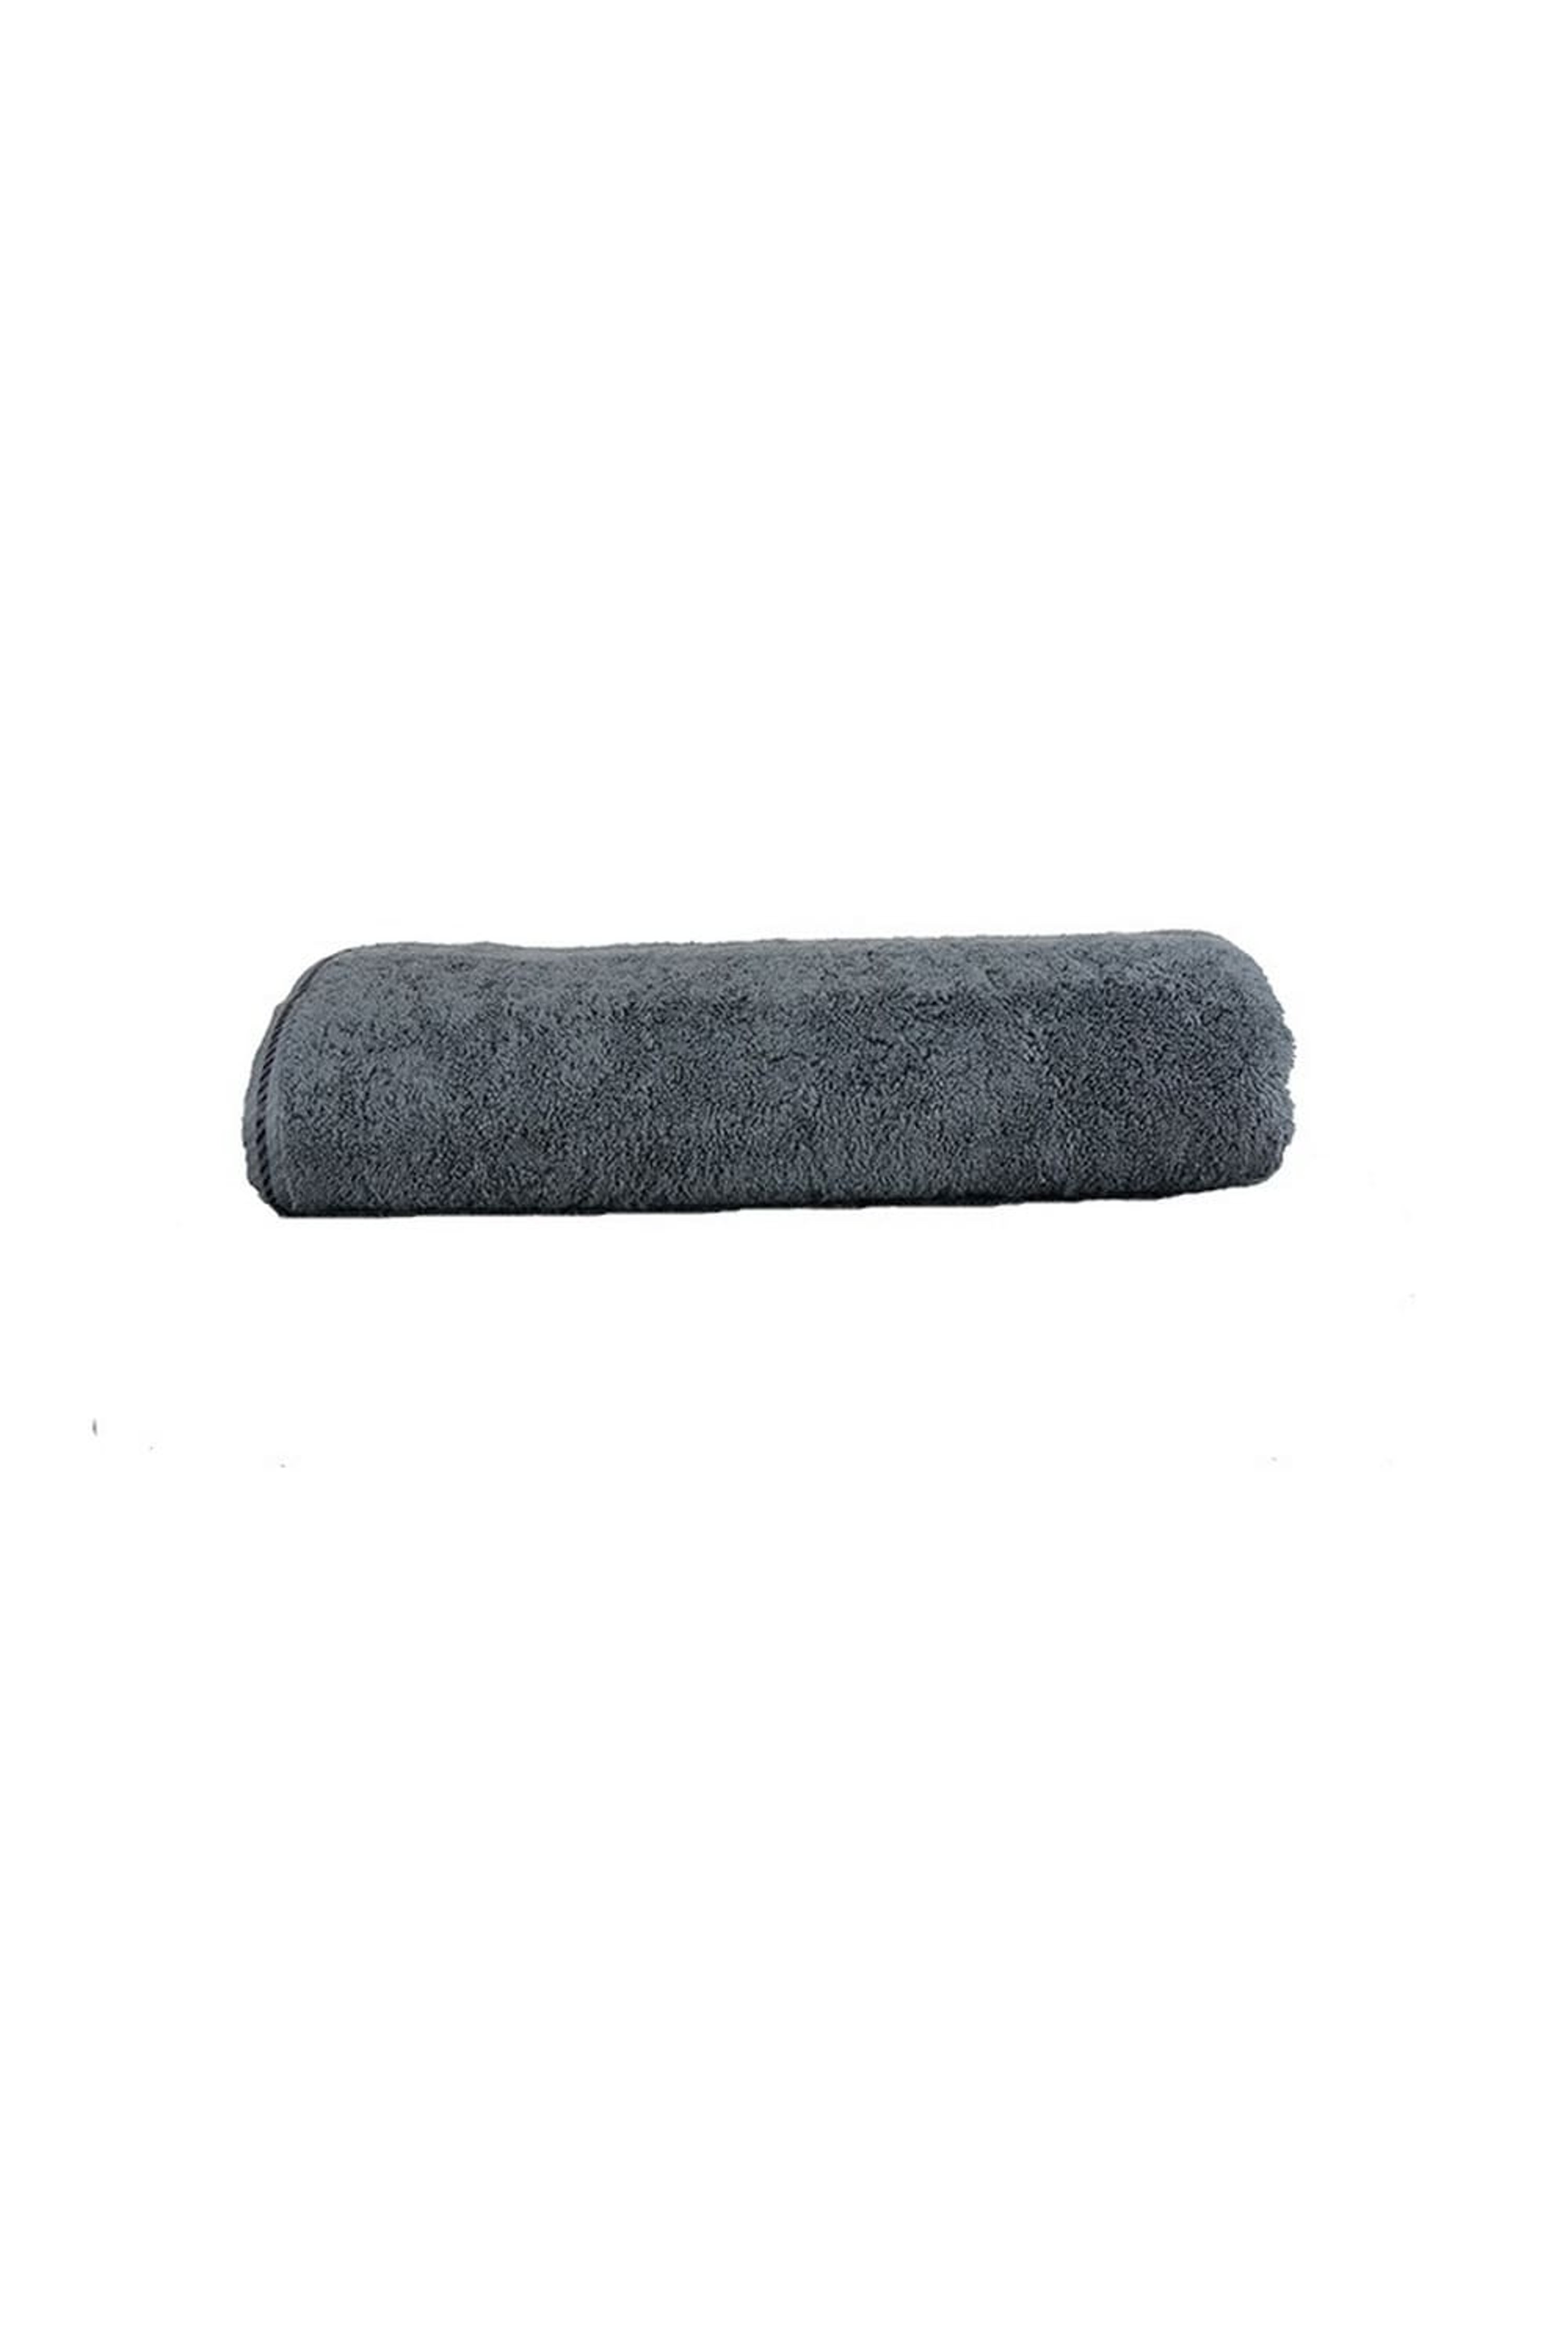 A&R TOWELS A&R TOWELS A&R TOWELS ULTRA SOFT BATH TOWEL (GRAPHITE) (ONE SIZE)